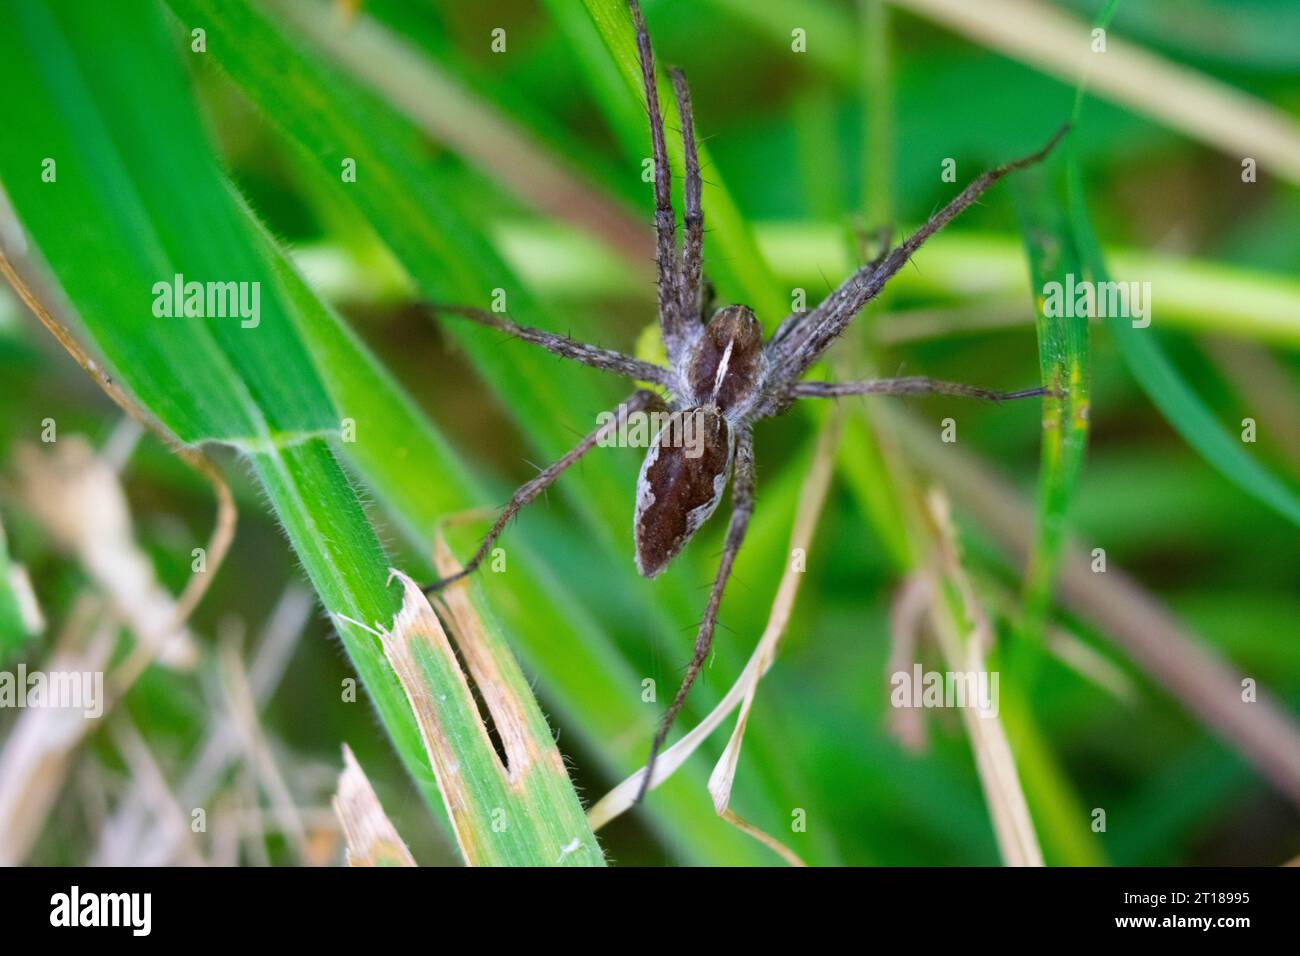 Nursery web spider sitting in the grass Stock Photo